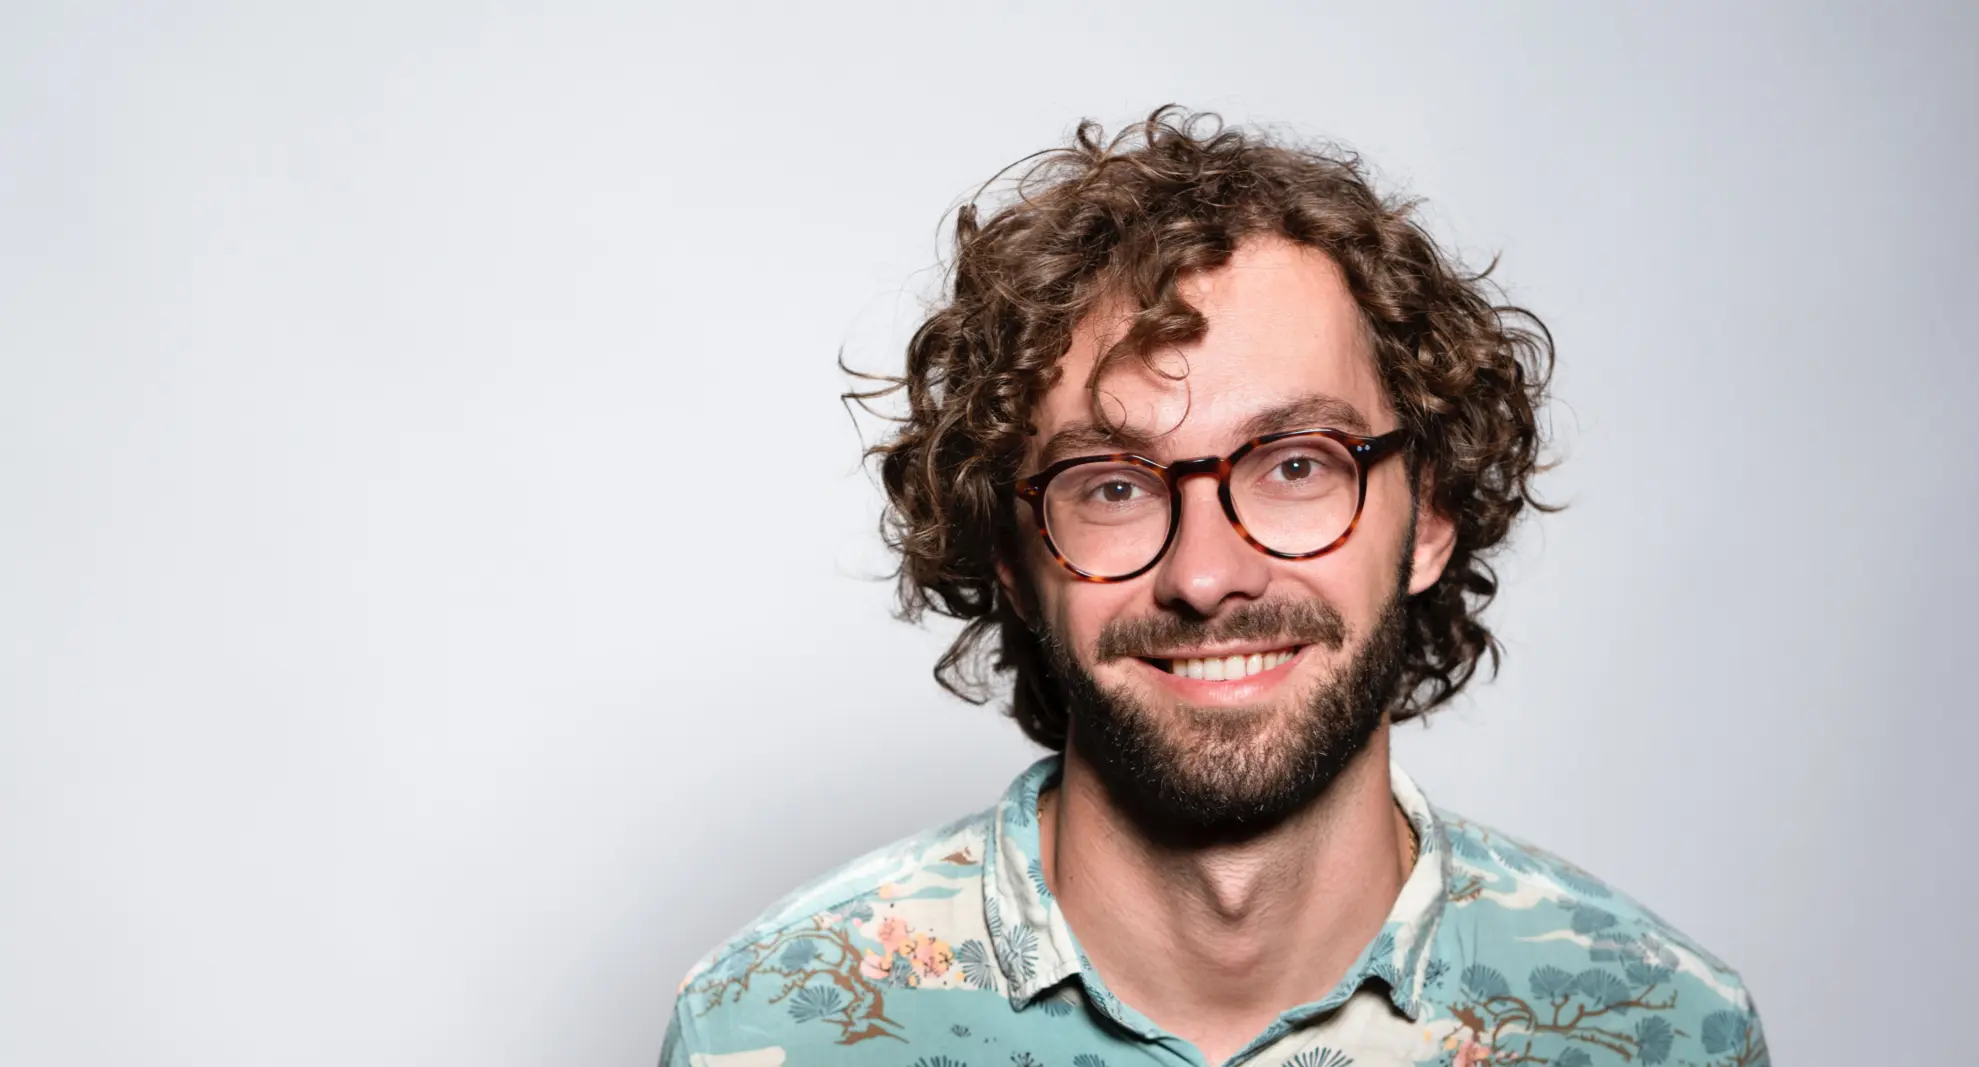 Smiling man with curly hairs, shirt, glasses on brown background